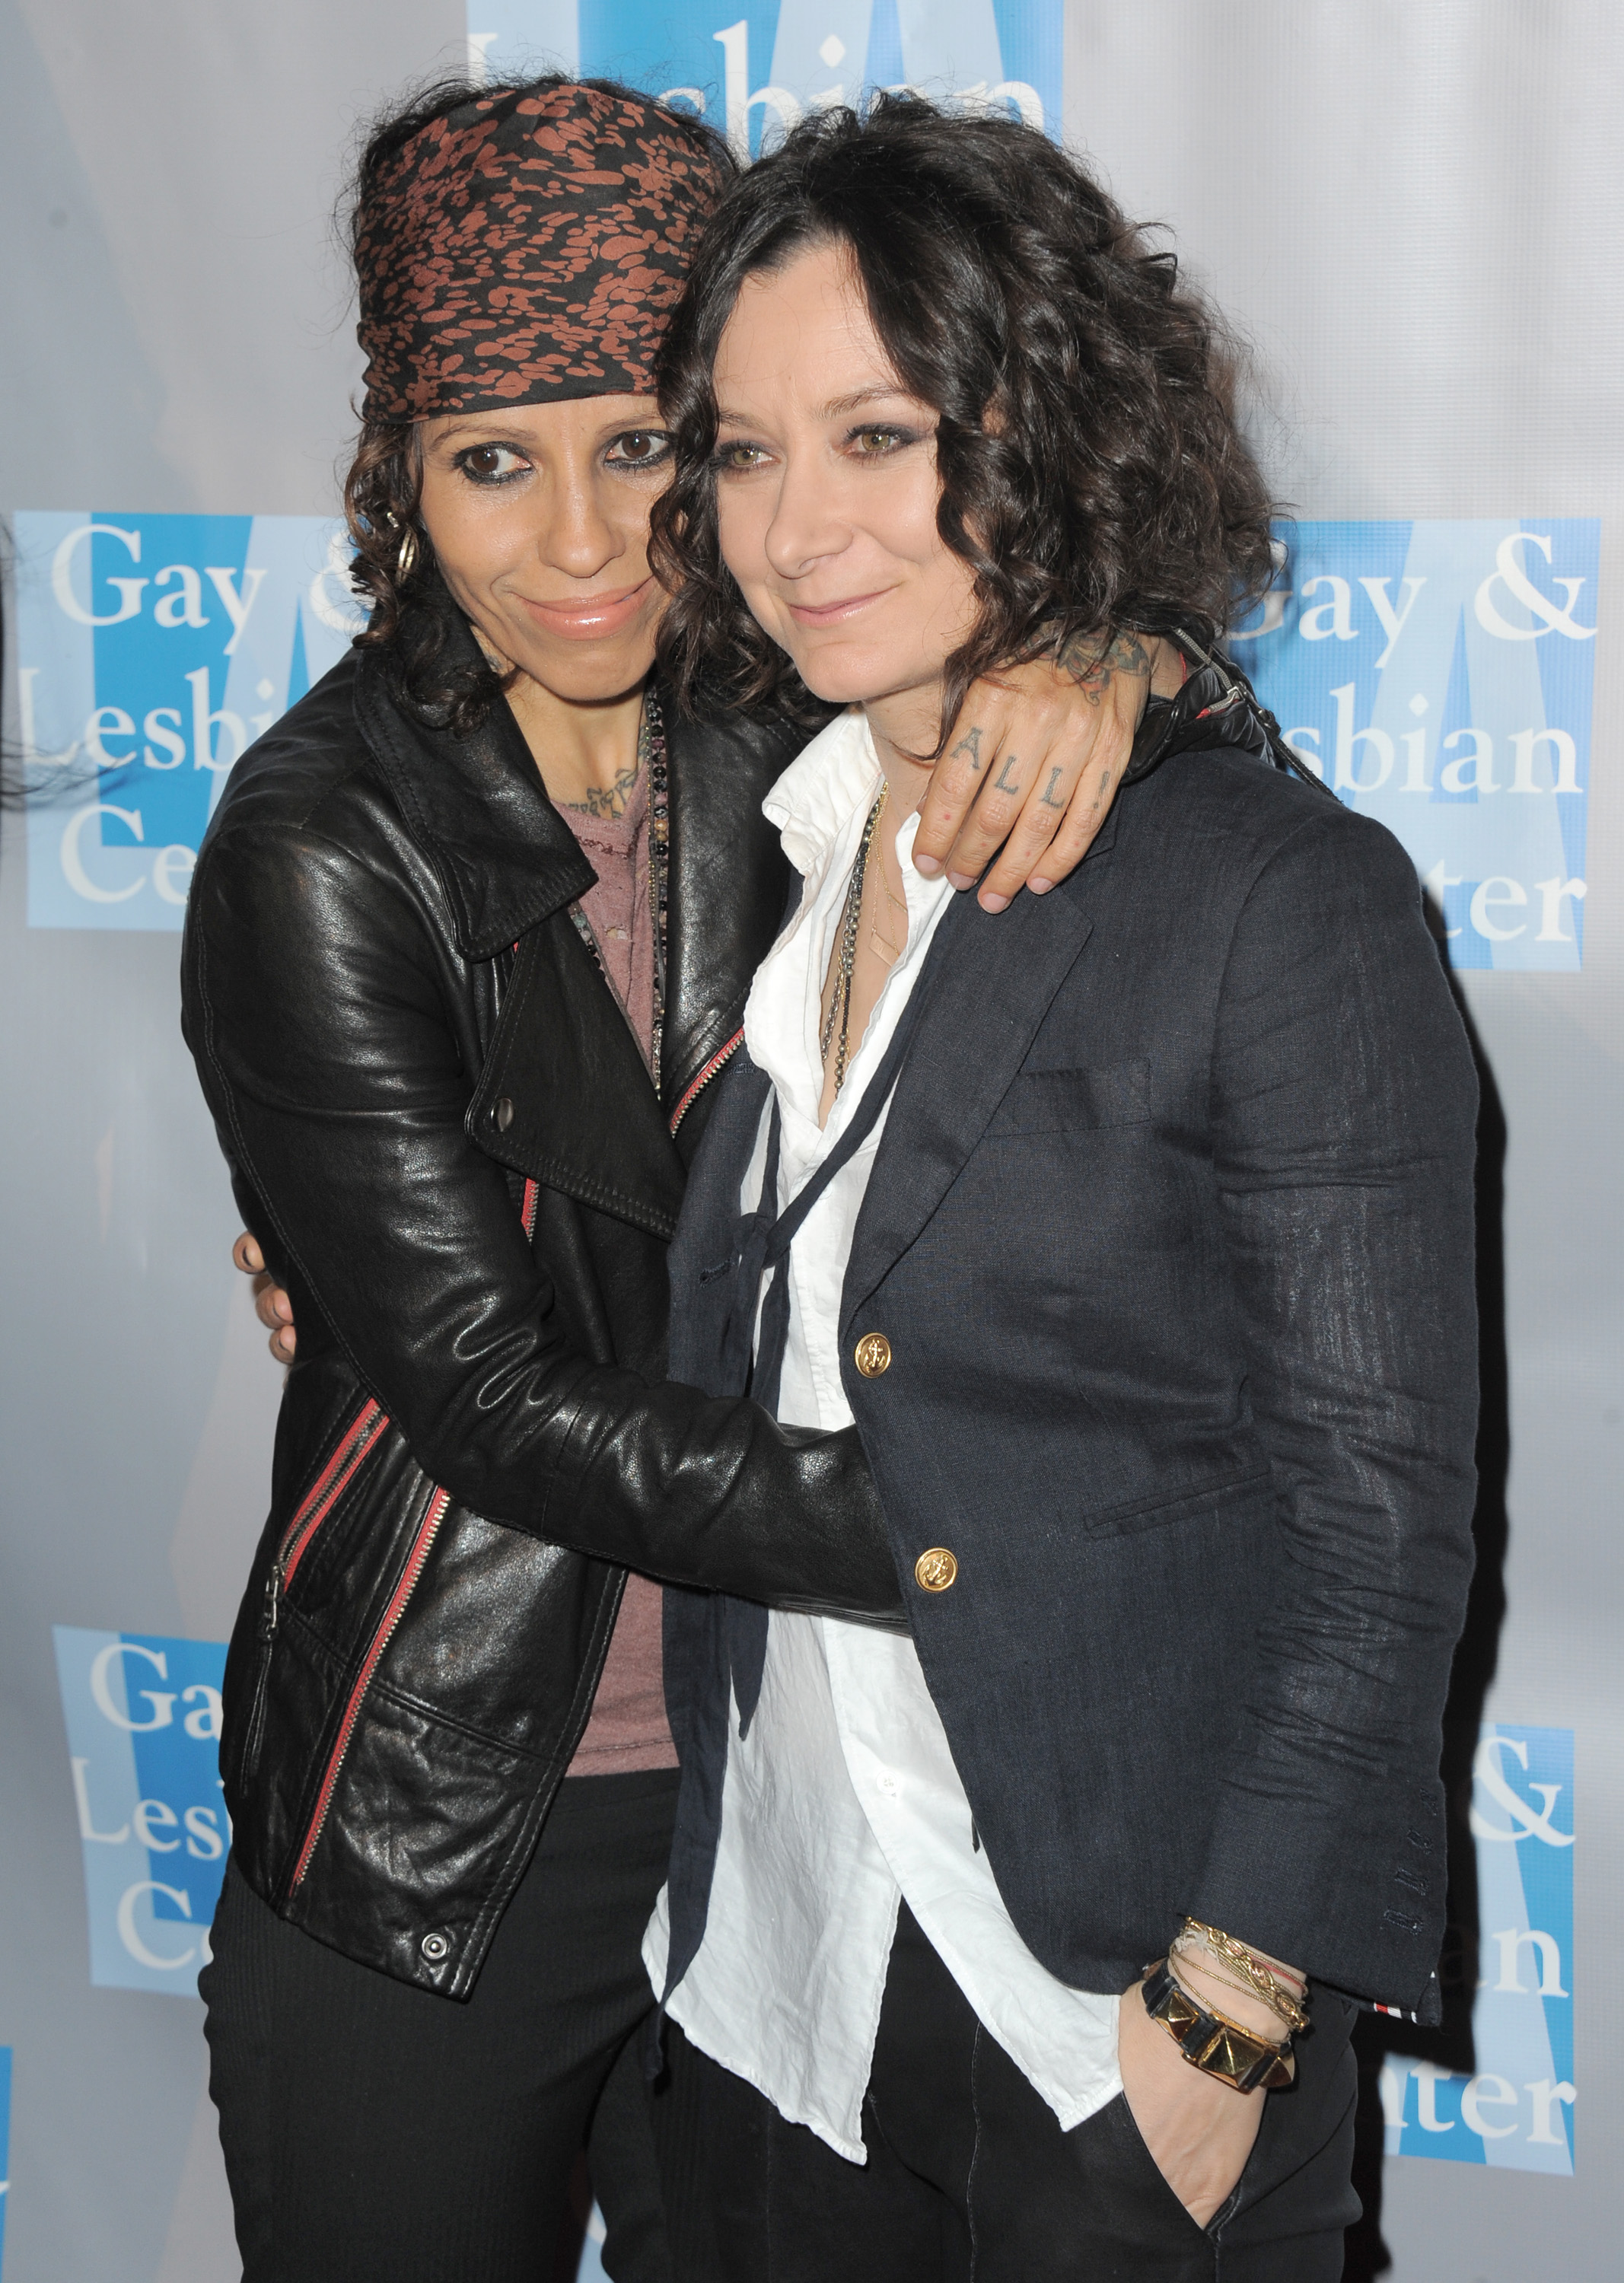 Sara Gilbert And Linda Perry Facts About Their Relationship